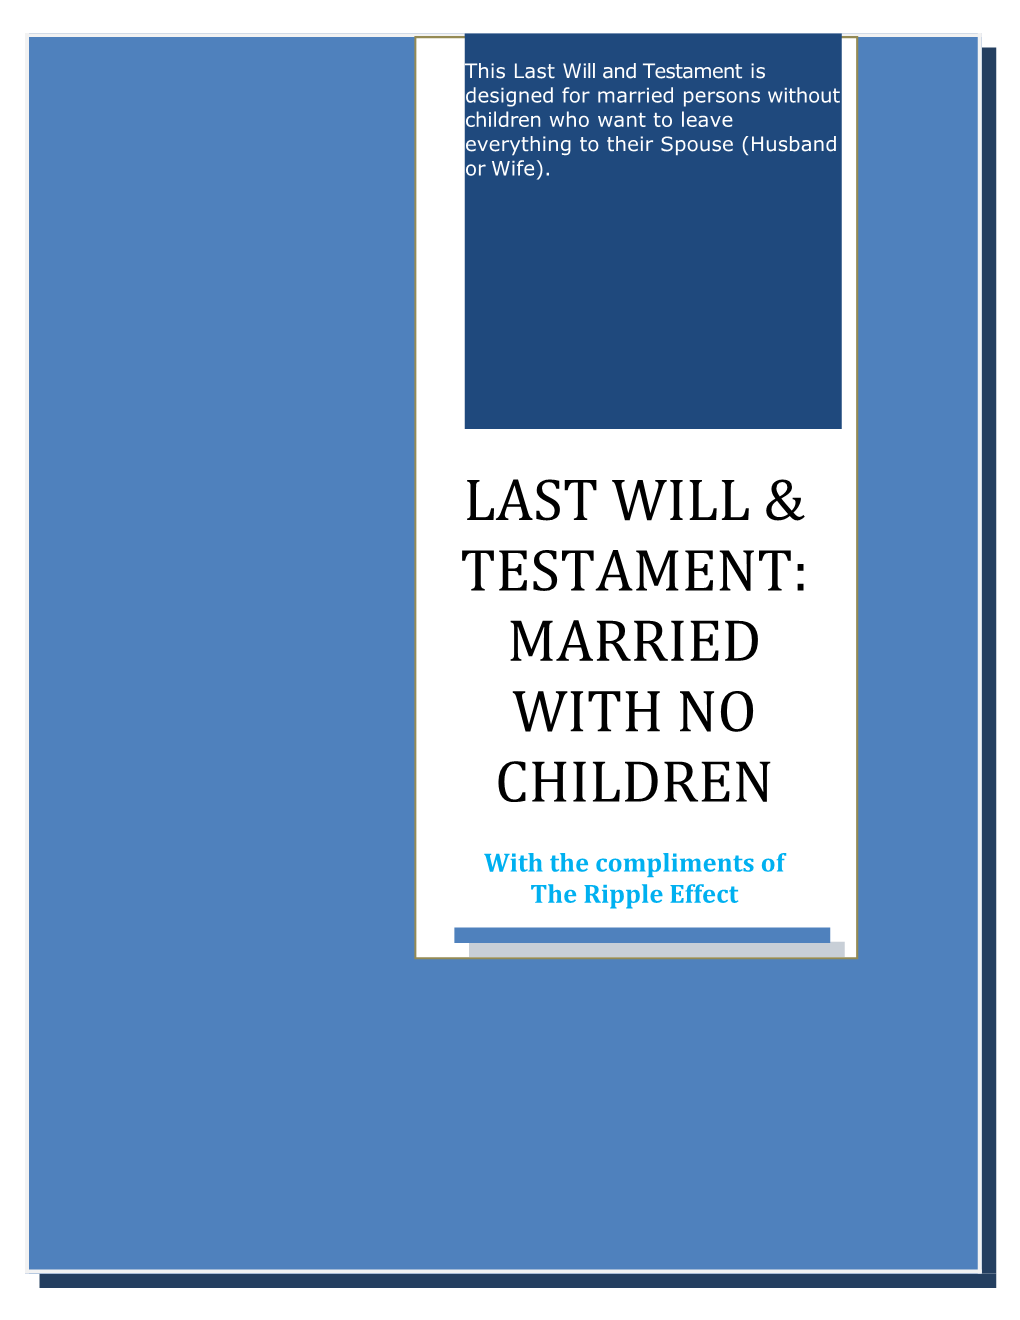 Last Will & Testament Married with No Children